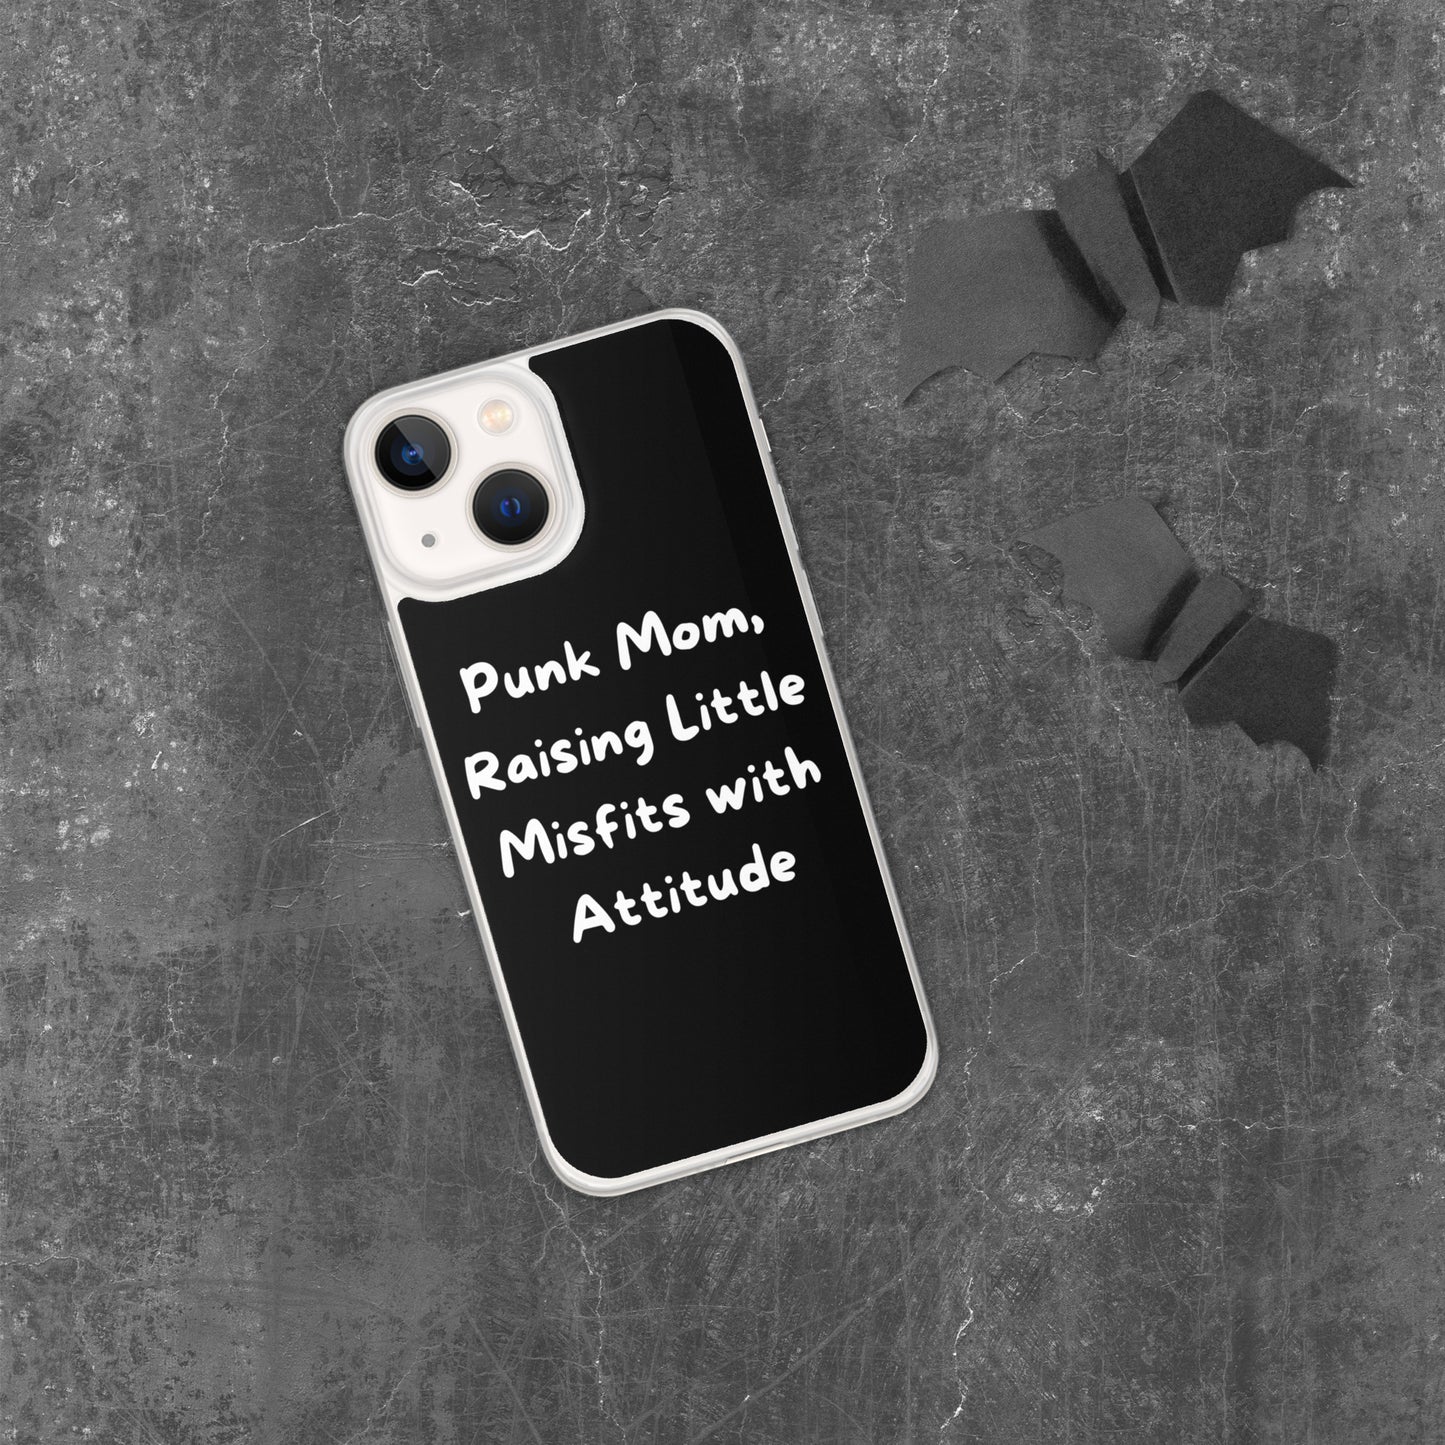 Little Misfits with Attitude Case for iPhone®